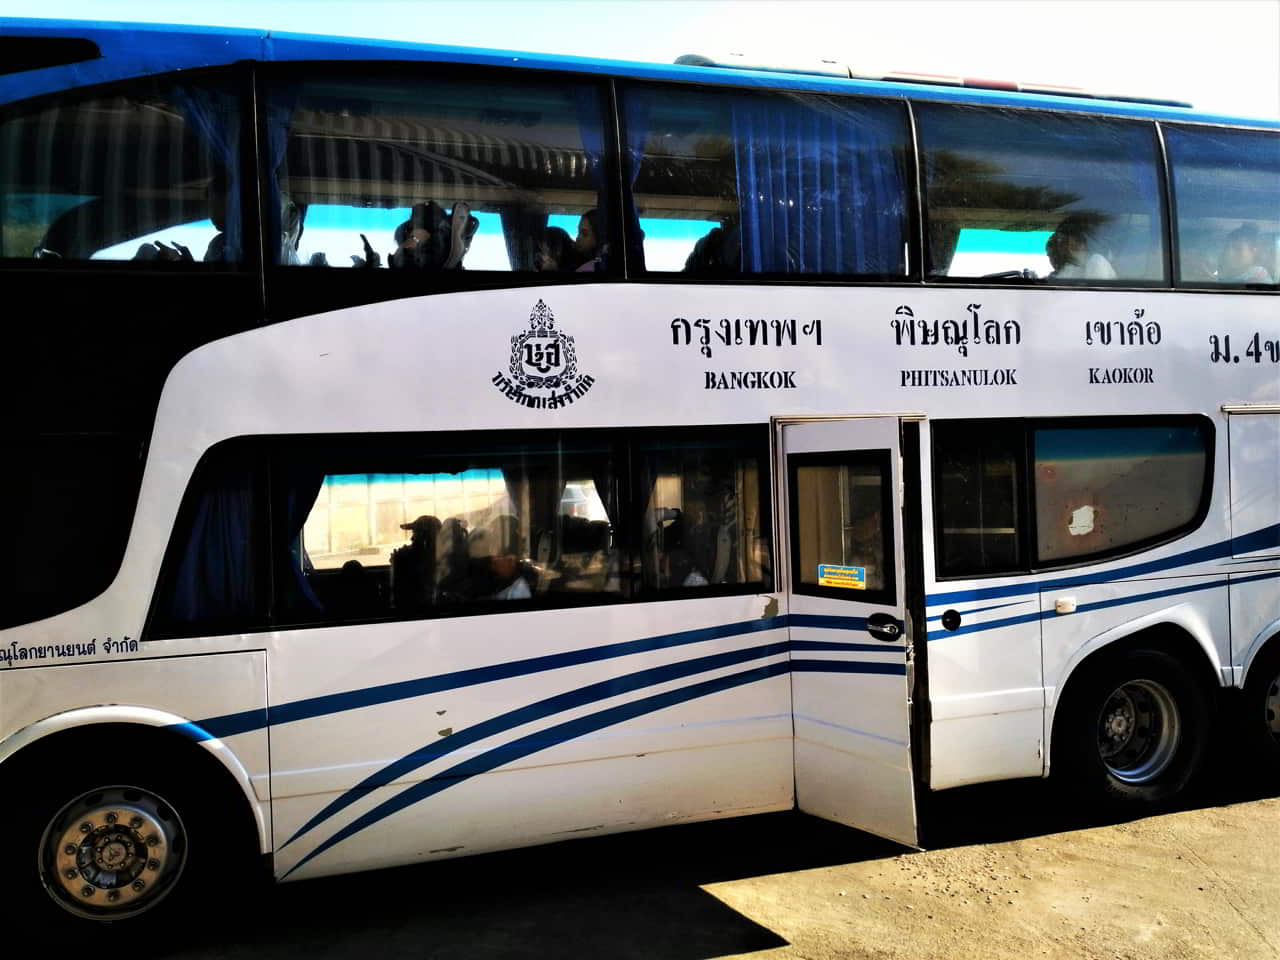 How to get to Bangkok bus stations